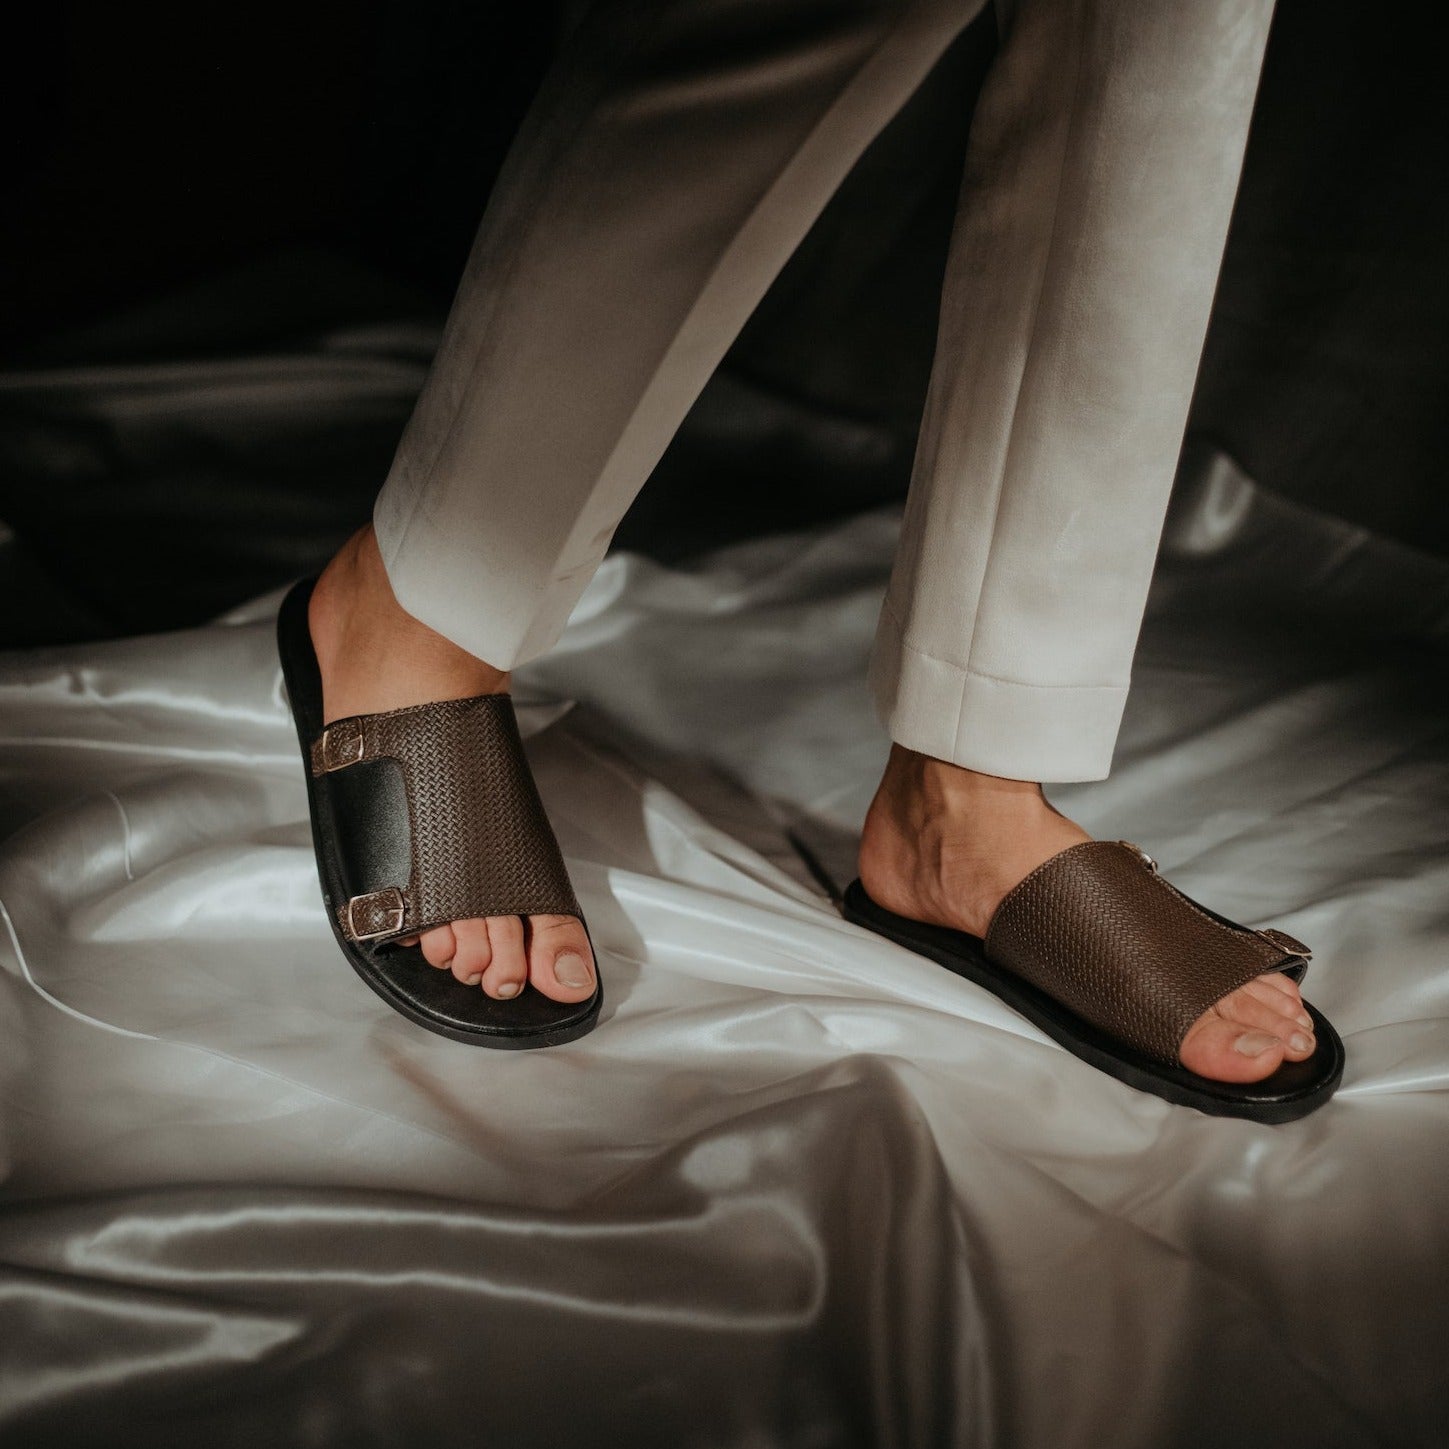 A pair of T-Rad Double Monk Strap Sandals in posh brown on a white background. Brand: Monkstory.